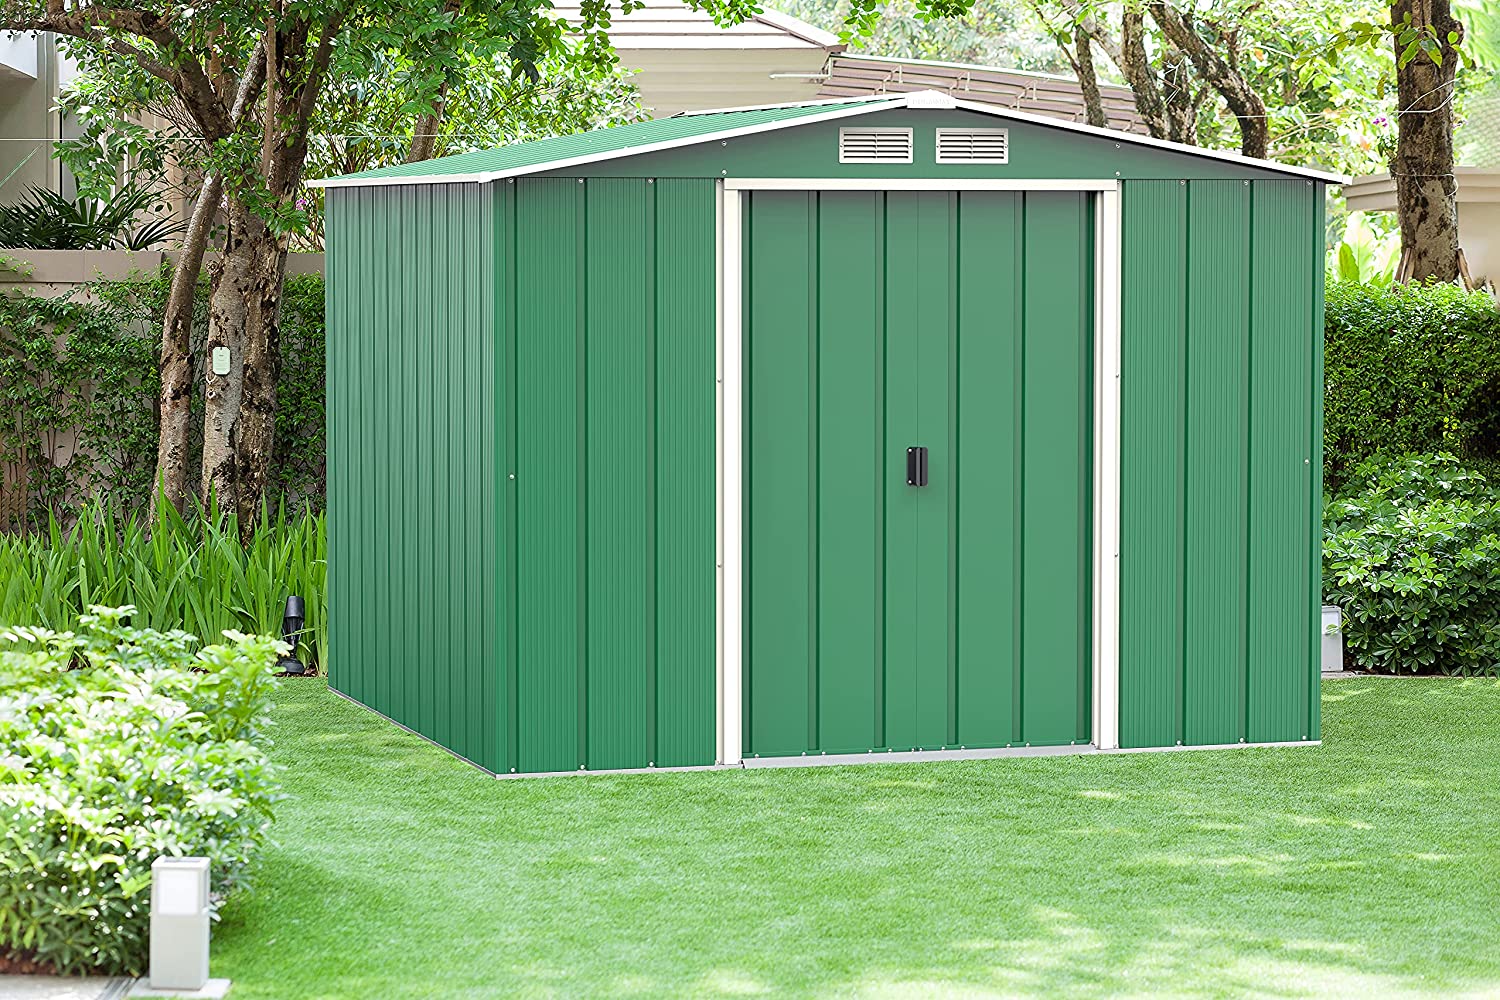  DURAMAX ECO METAL SHED 10X8FT GREEN